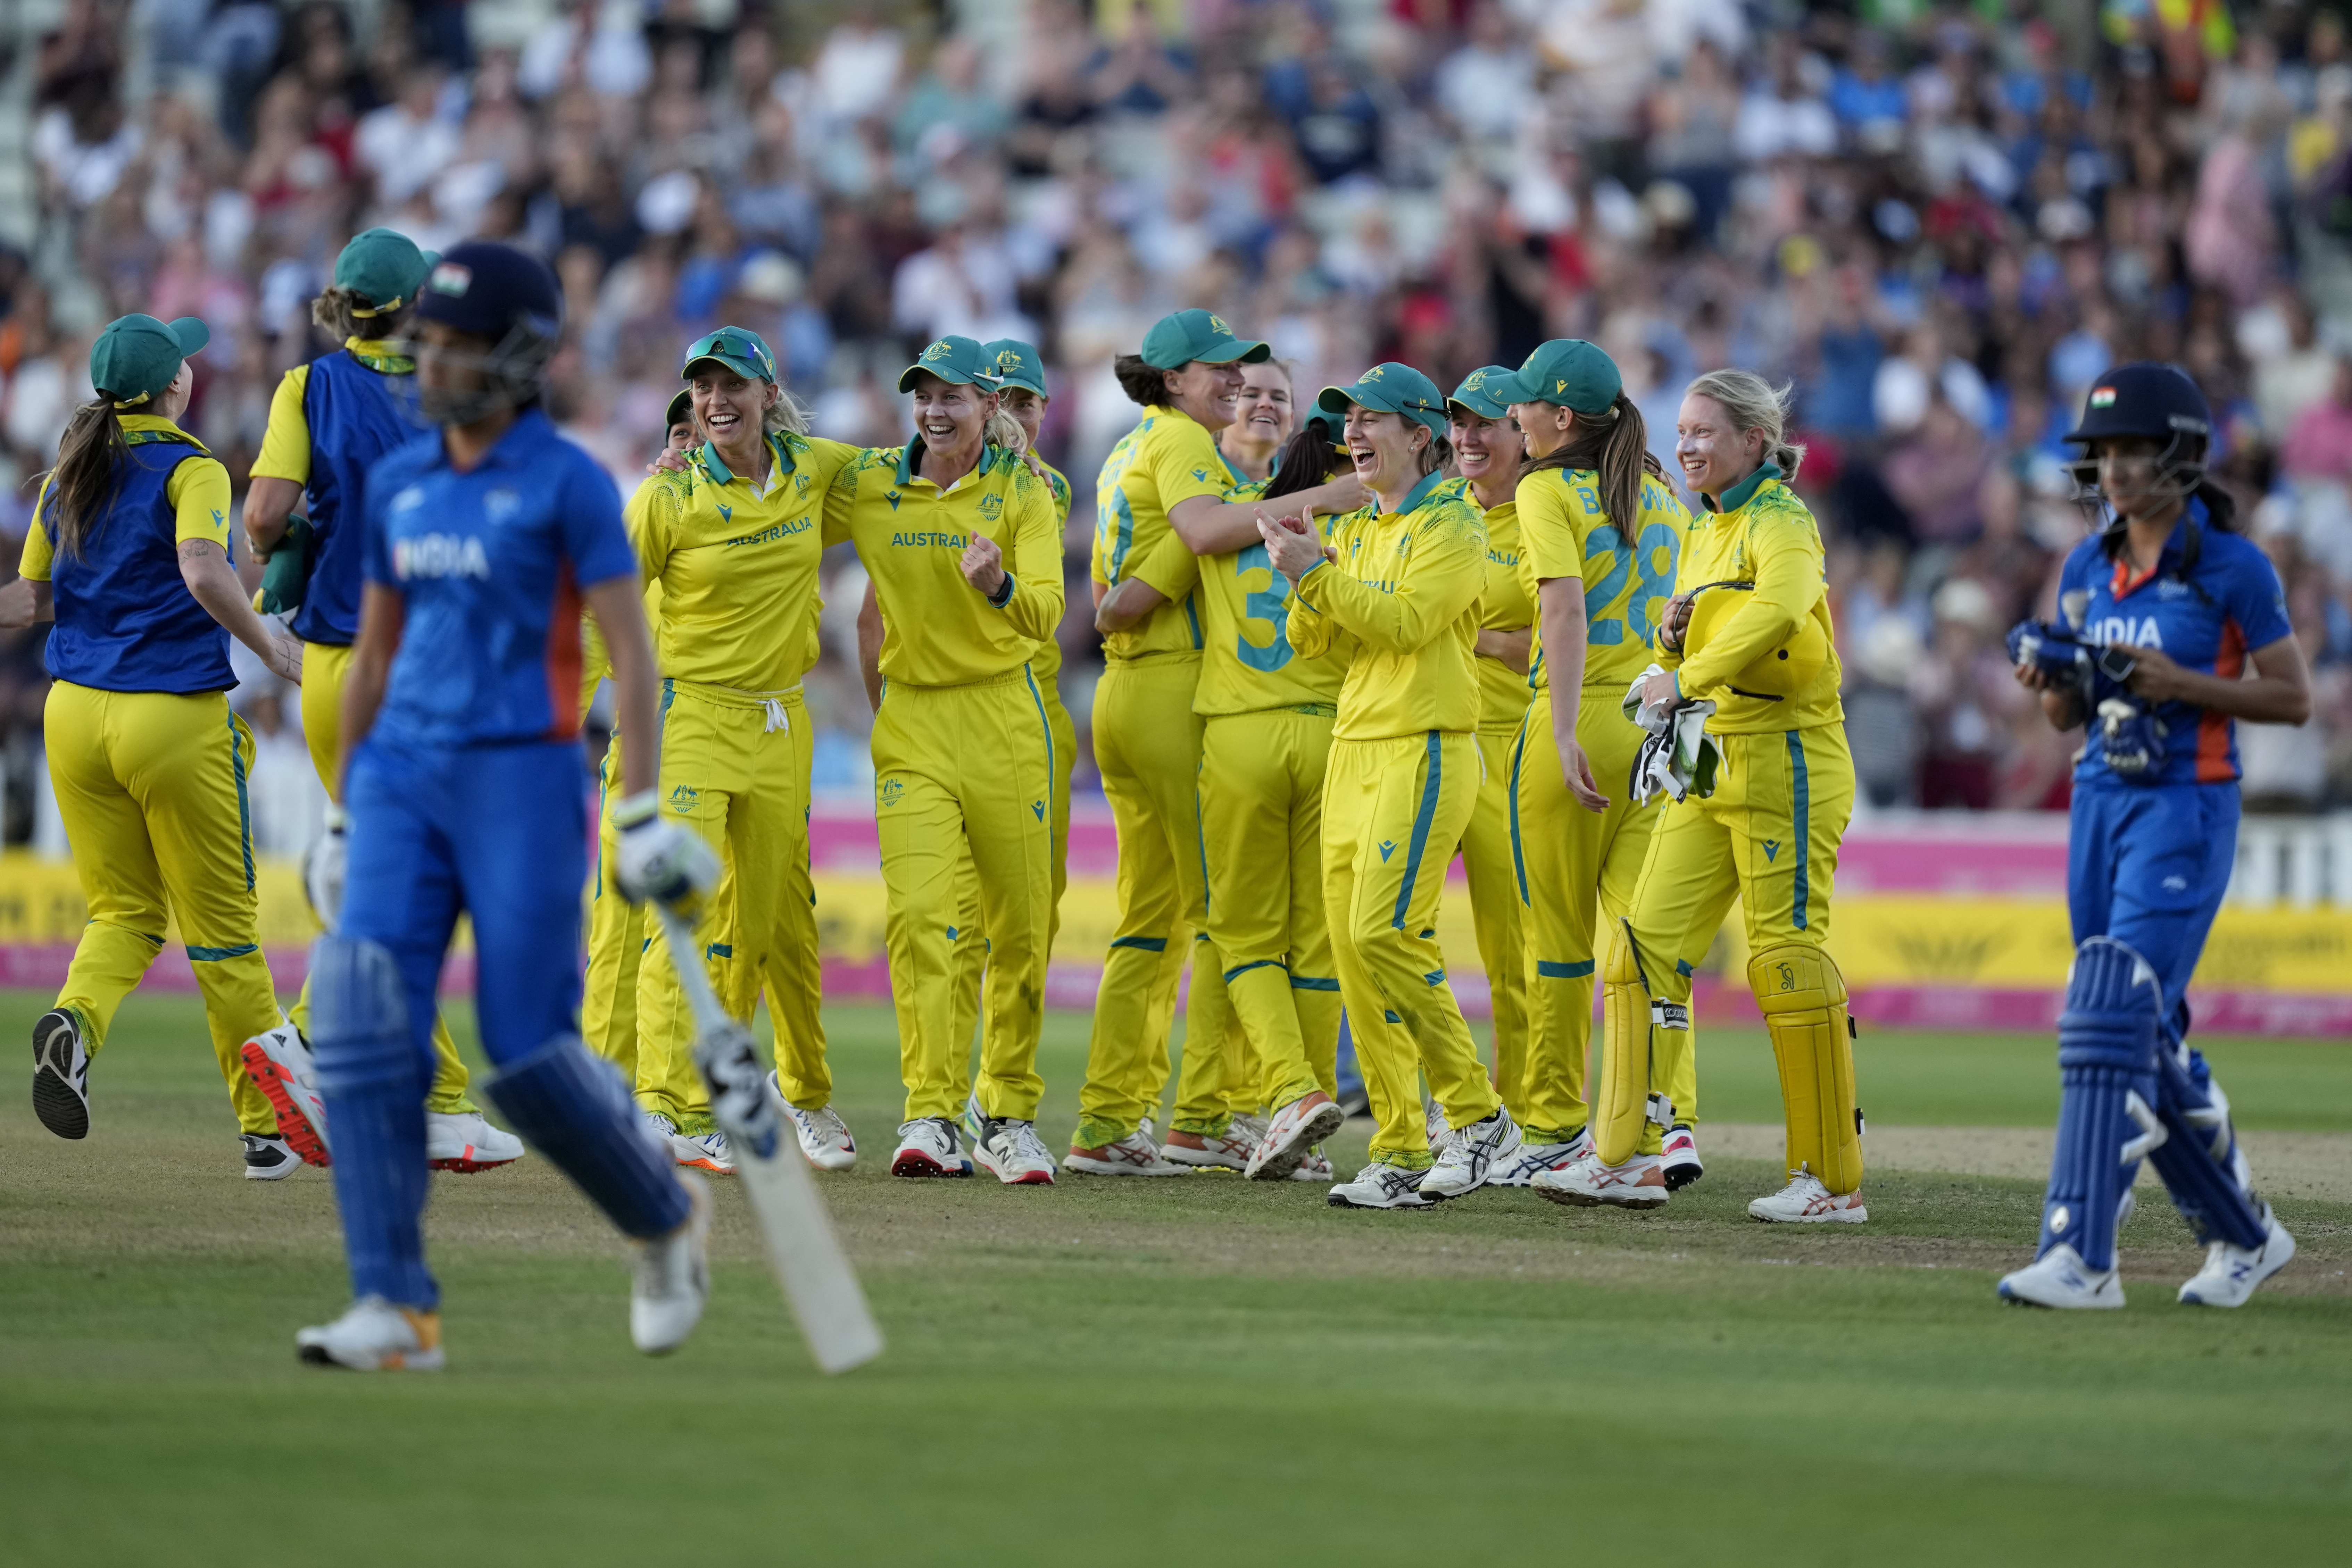 India's lower-order caved in meekly to get all out for 152 in 19.3 overs.